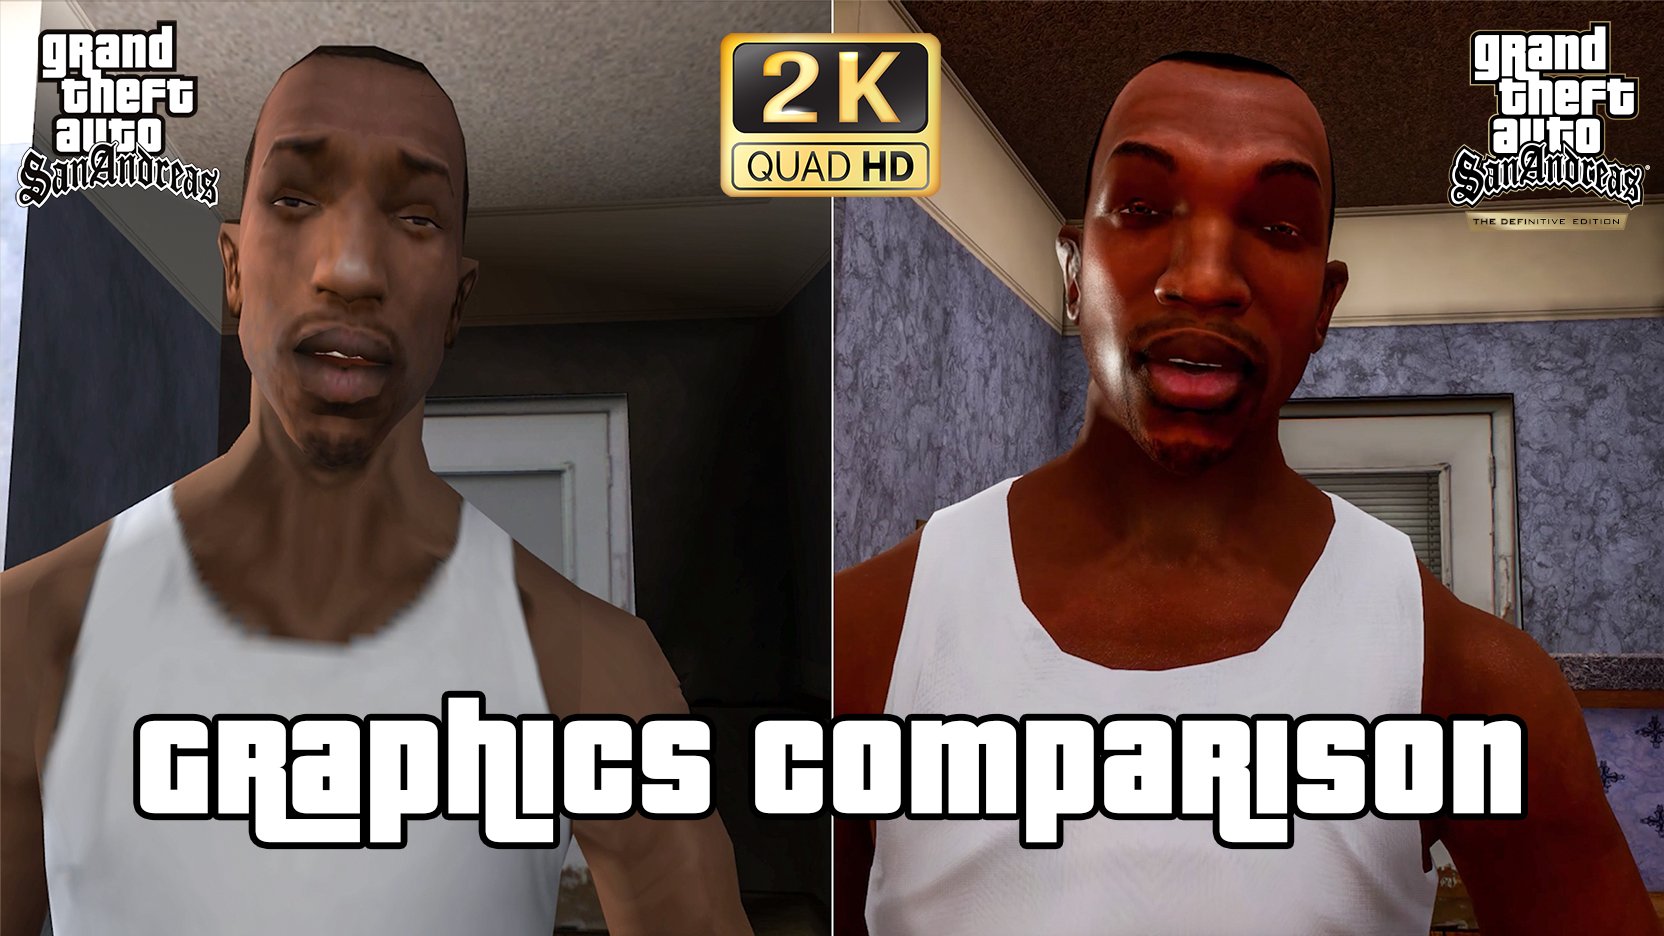 Grand Theft Auto San Andreas - The Definitive Edition - Graphics